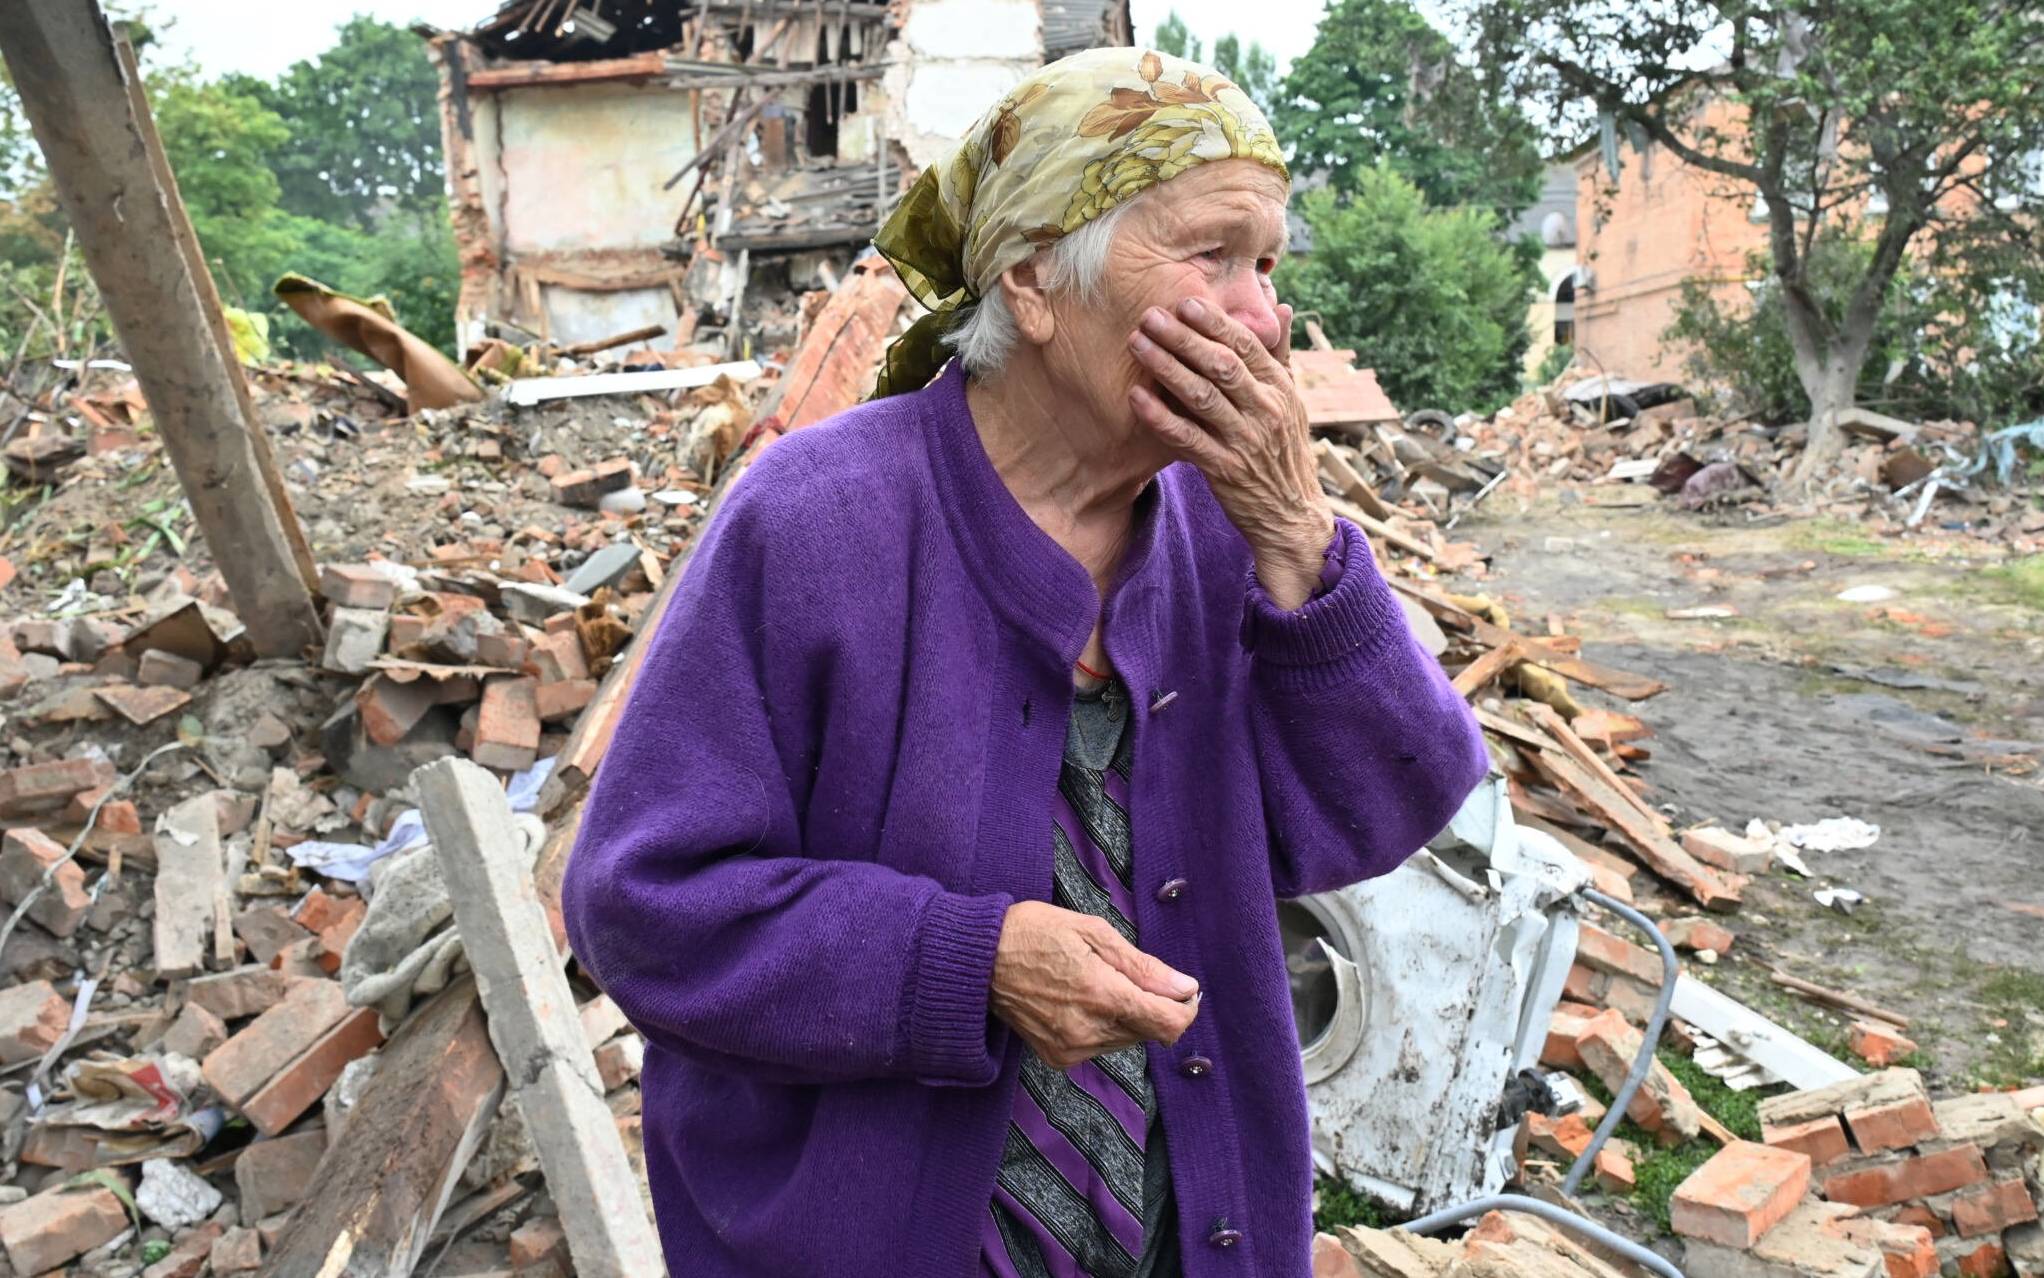 A local resident, Raisa Kuval, 82, reacts next to a damaged building partially destroyed after a shelling in the city of Chuguiv, east of Kharkiv, on July 16, 2022. - In the northeast region around Ukraine's second city of Kharkiv, governor Oleg Synegubov said an overnight Russian missile attack killed three people in the town of Chuguiv. (Photo by SERGEY BOBOK / AFP)